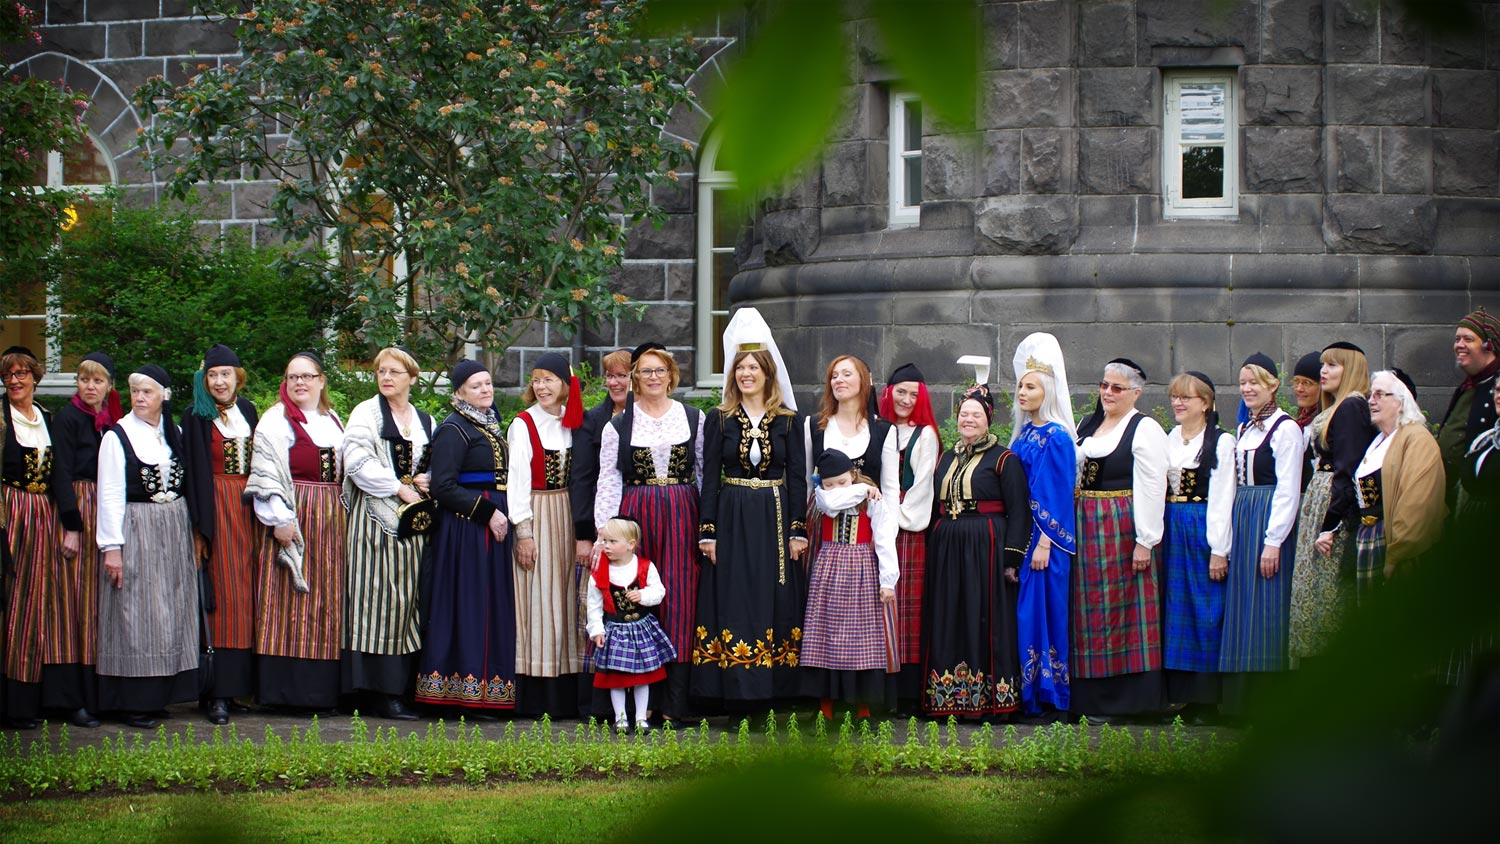 A group of many women in a long line, dressed in all kinds of national costume,  in the garden behind the Icelandic parliament, Althingi. In the middle is the Fjallkonan, the Icelandic Mountain Woman, a young woman dressed as a symbol for the country.